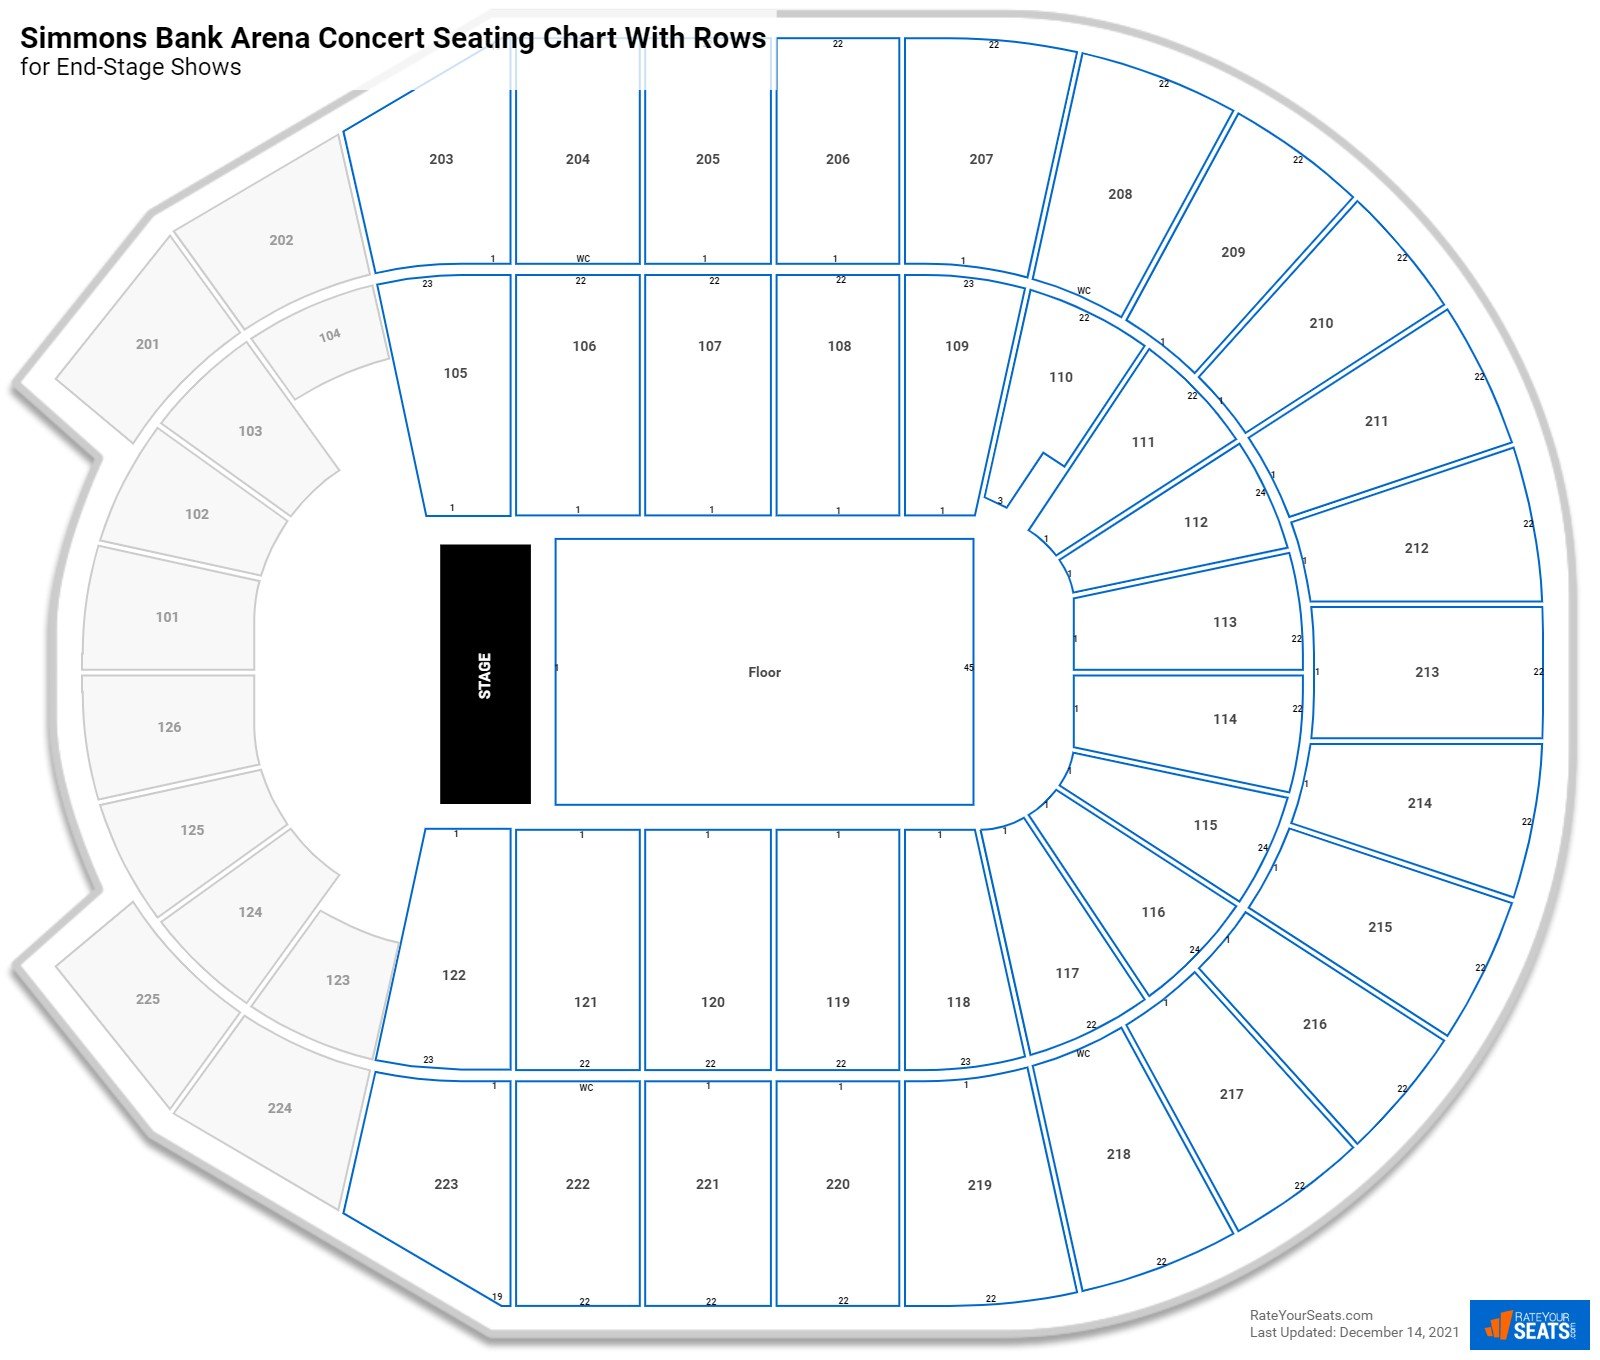 Simmons Bank Arena seating chart with row numbers